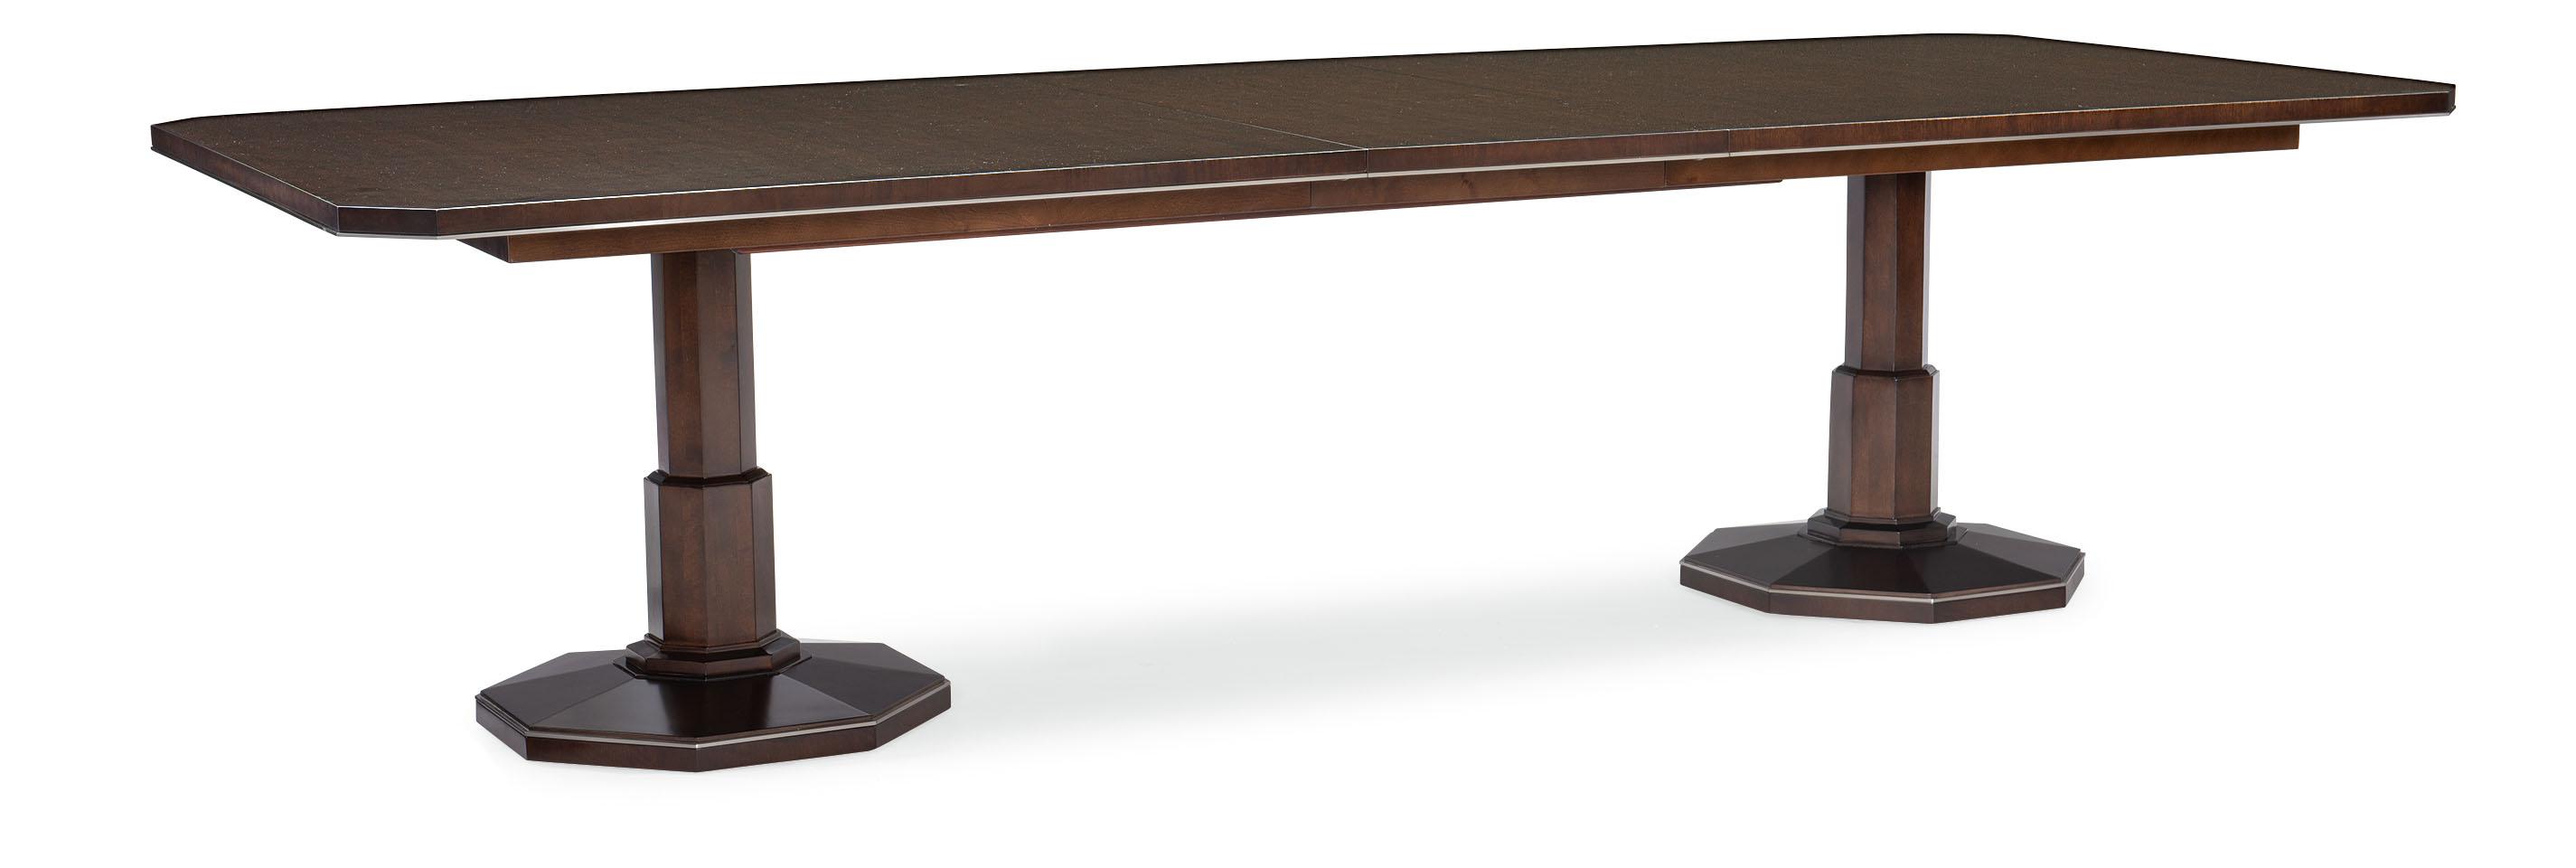 Contemporary Dining Table Cult Classic CLA-420-201 in Mocha 